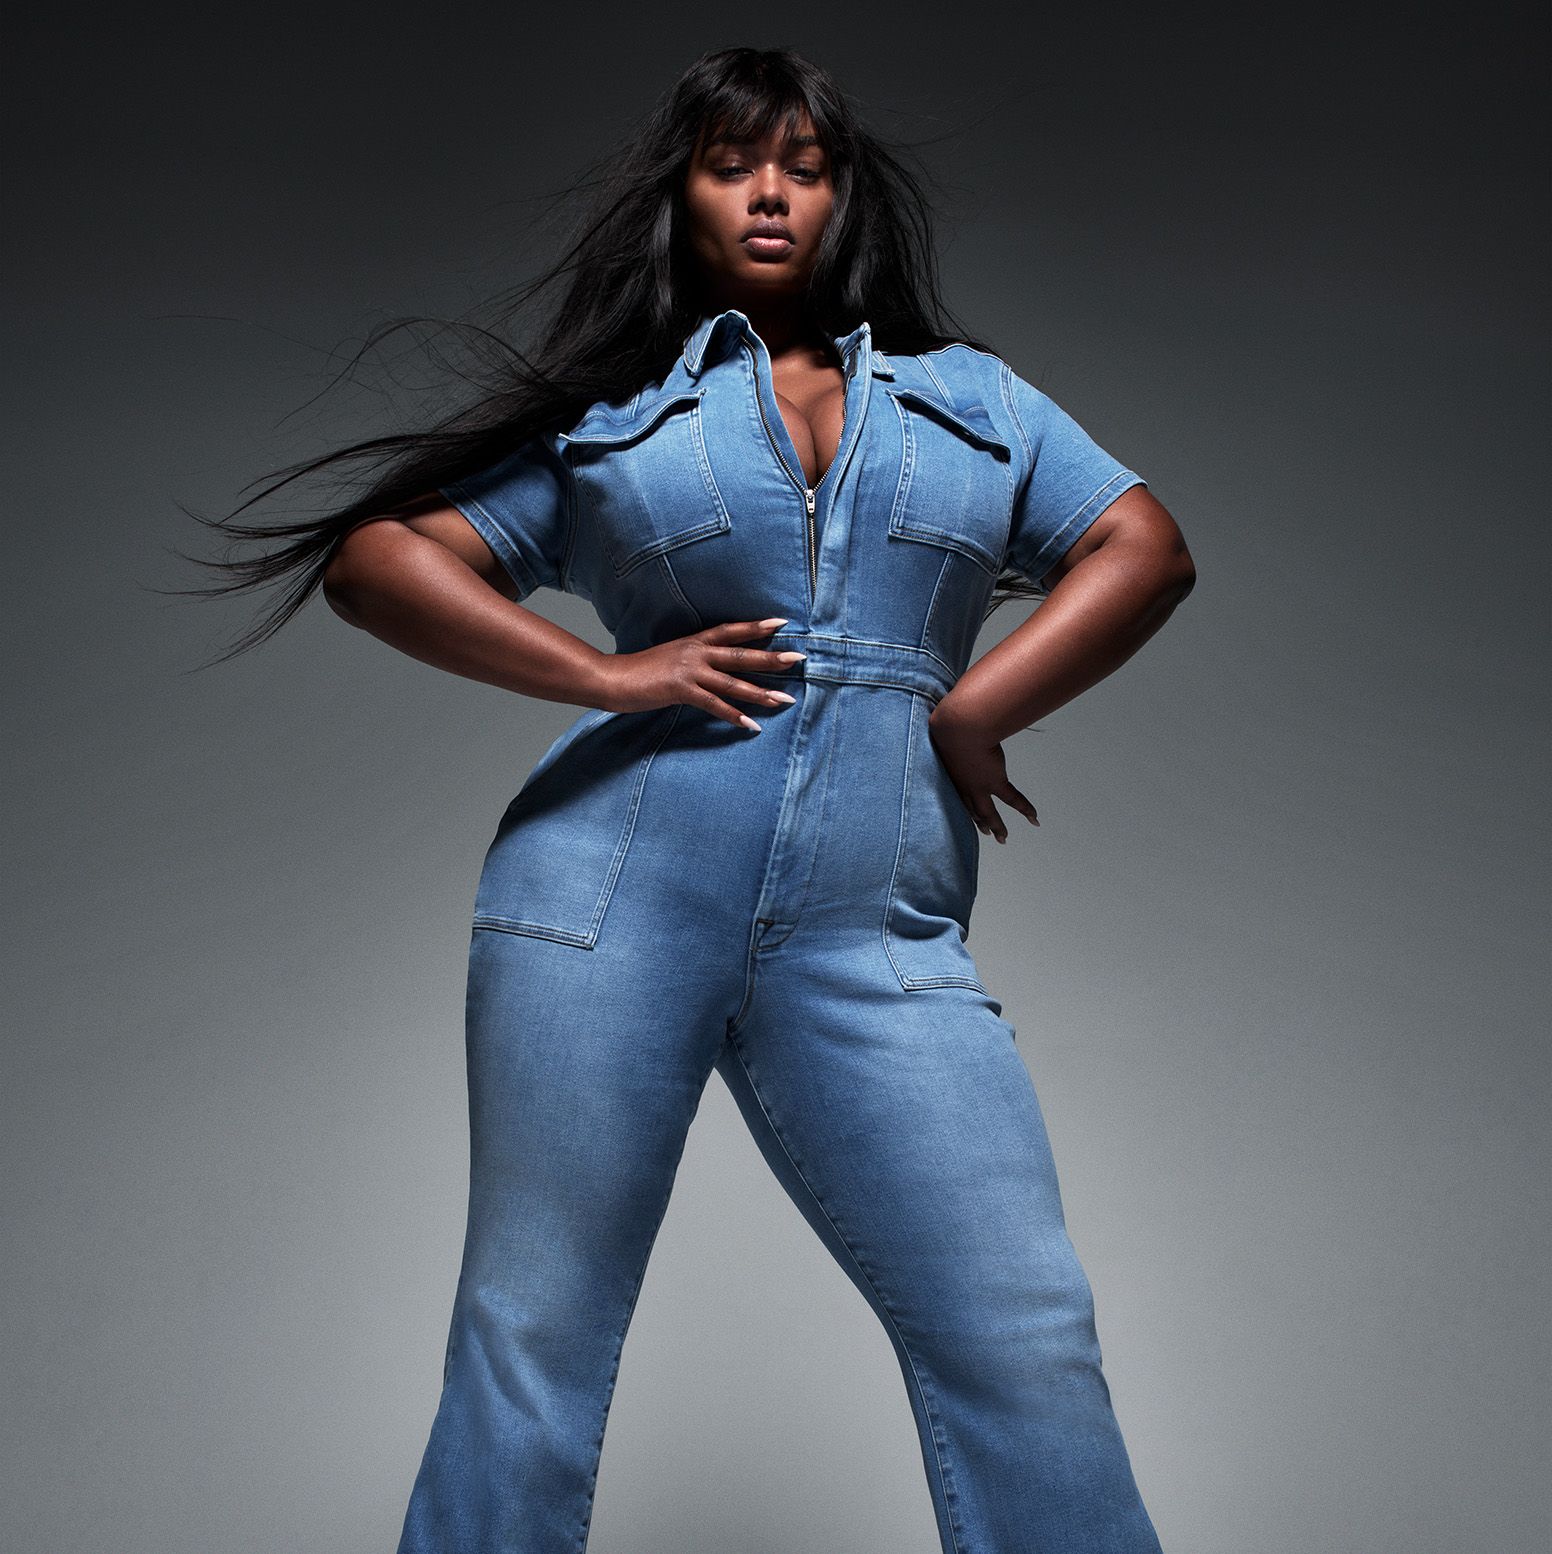 Major Collab Alert: Good American Is Bringing Its Size-Inclusive Jeans to Zara